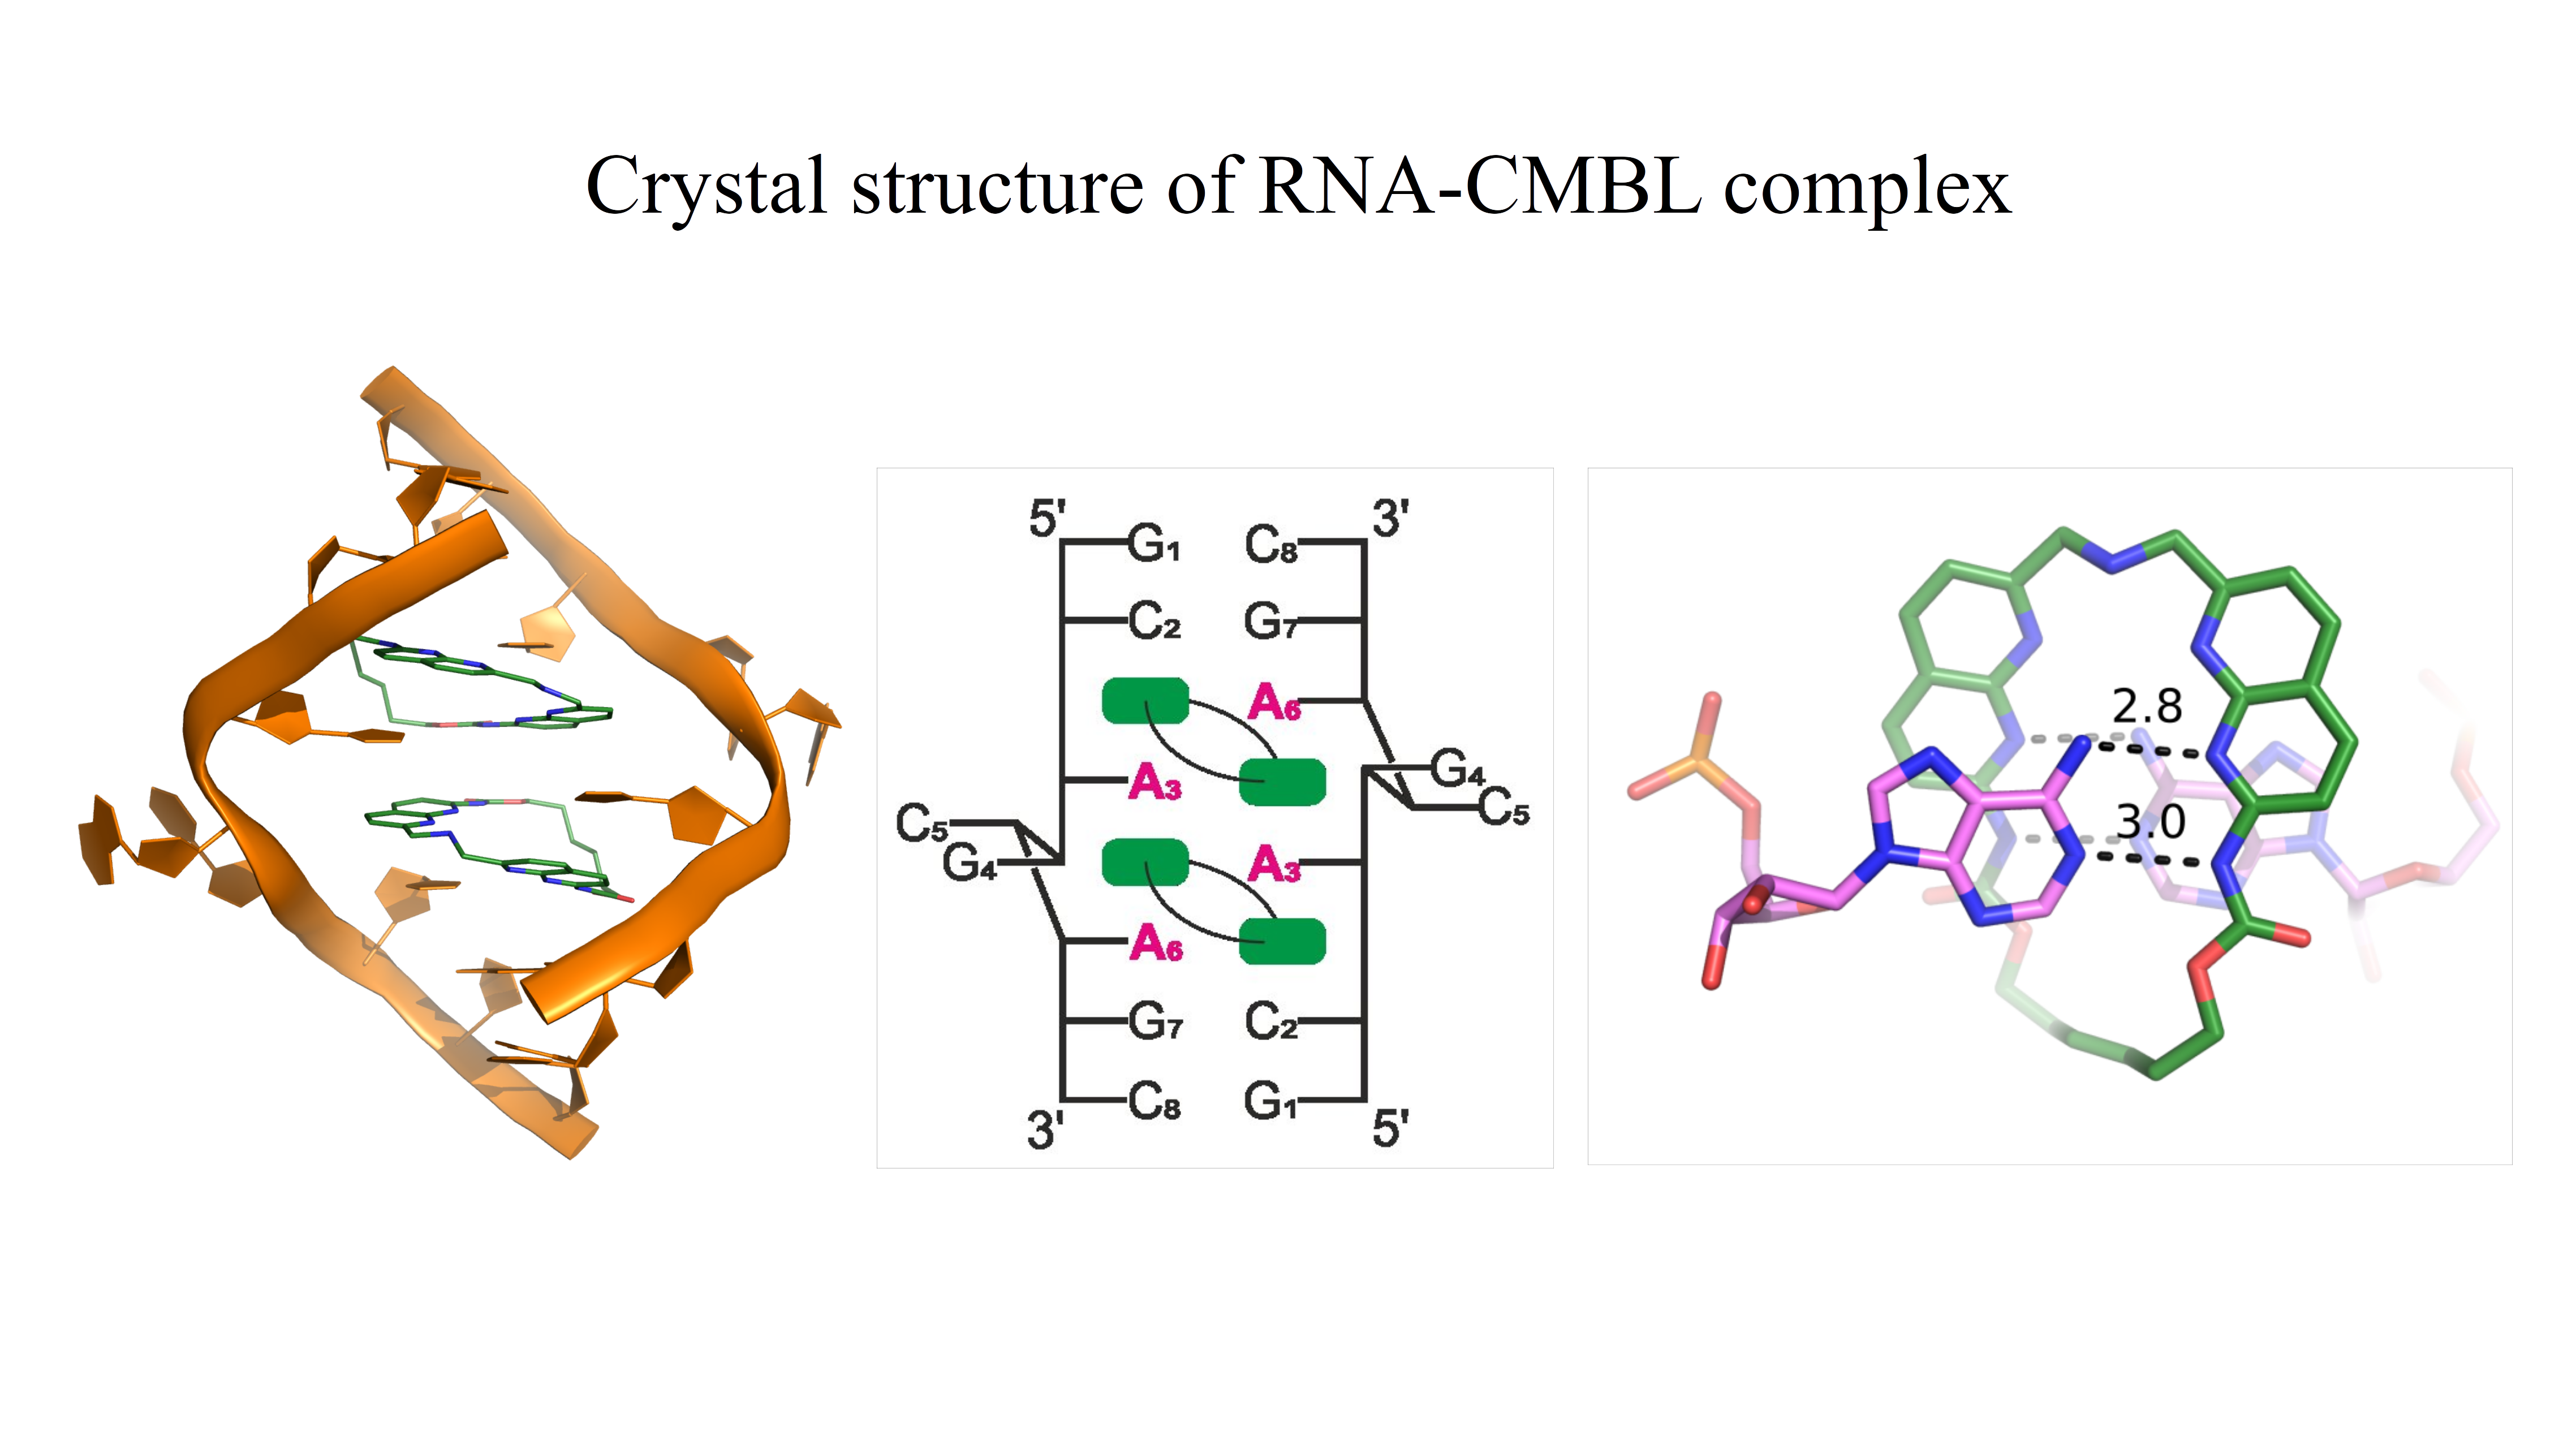 The figure shows a crystal structure of RNA containing CAG repeats associated with the pathogenesis of certain neurodegenerative diseases. On the left is a crystal model of an RNA complex with a small CMBL molecule. Two ligand molecules are bound to the center of the helix. It can also be seen that on each strand of the duplex, two residues, guanosine and cytosine, are pushed out of the helix. In the center of the figure is a schematic representation of the crystal structure of the complex shown on the left. The diagram shows the secondary structure of the duplex. Each ligand molecule interacts with two adenosine residues located on opposite strands. The right side of the figure shows the detailed interaction of an adenosine residue with the CMBL ligand. The adenosine interacts with the Watson-Crick edge through two hydrogen bonds with the naphthyridine ring of the ligand, forming a pseudo-canonical adenosine-CMBL pair.